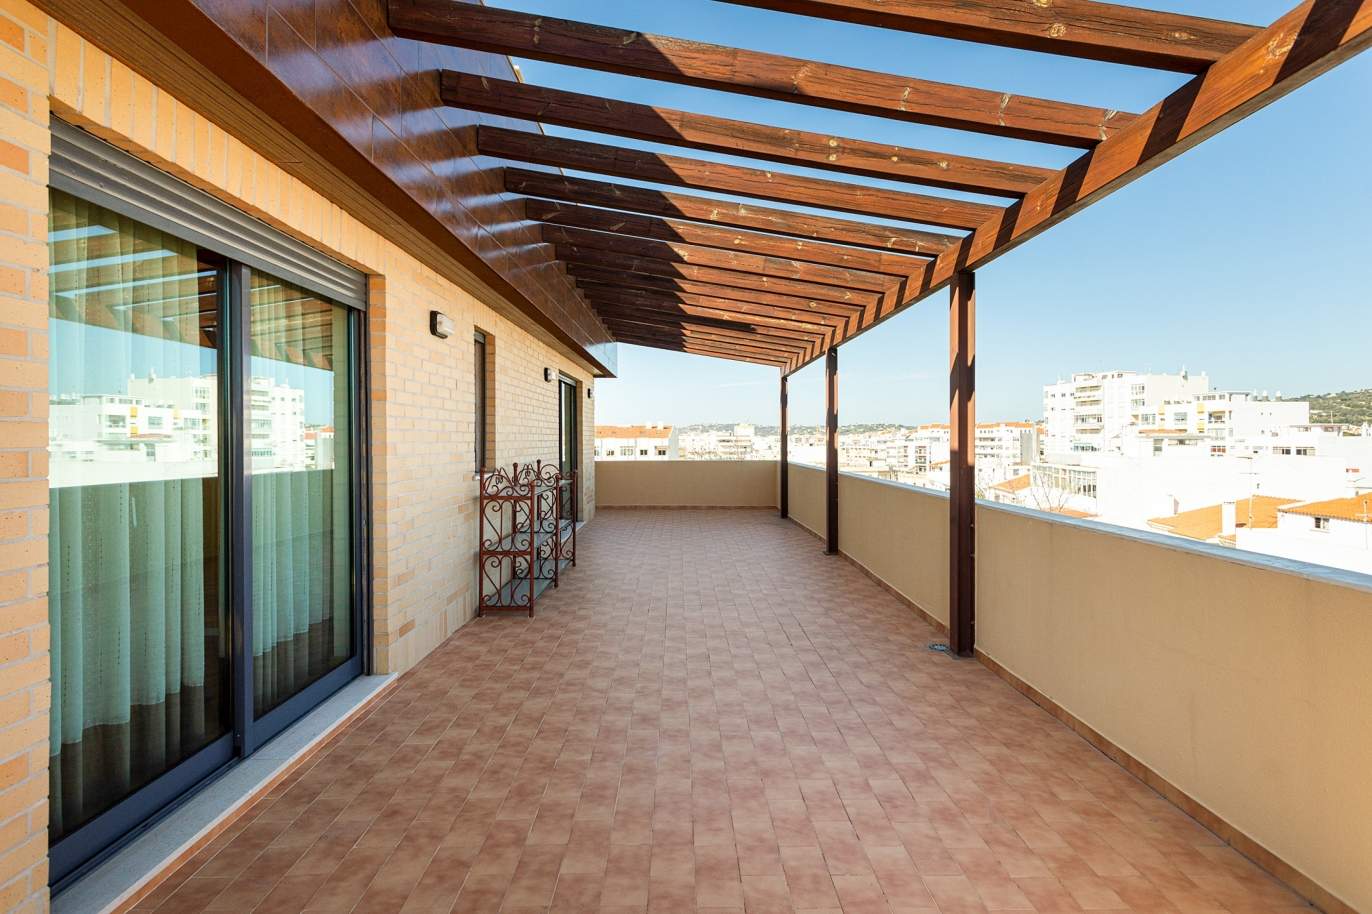 3 bedroom Penthouse, for sale, in the center of Loulé, Algarve - Portugal_192279